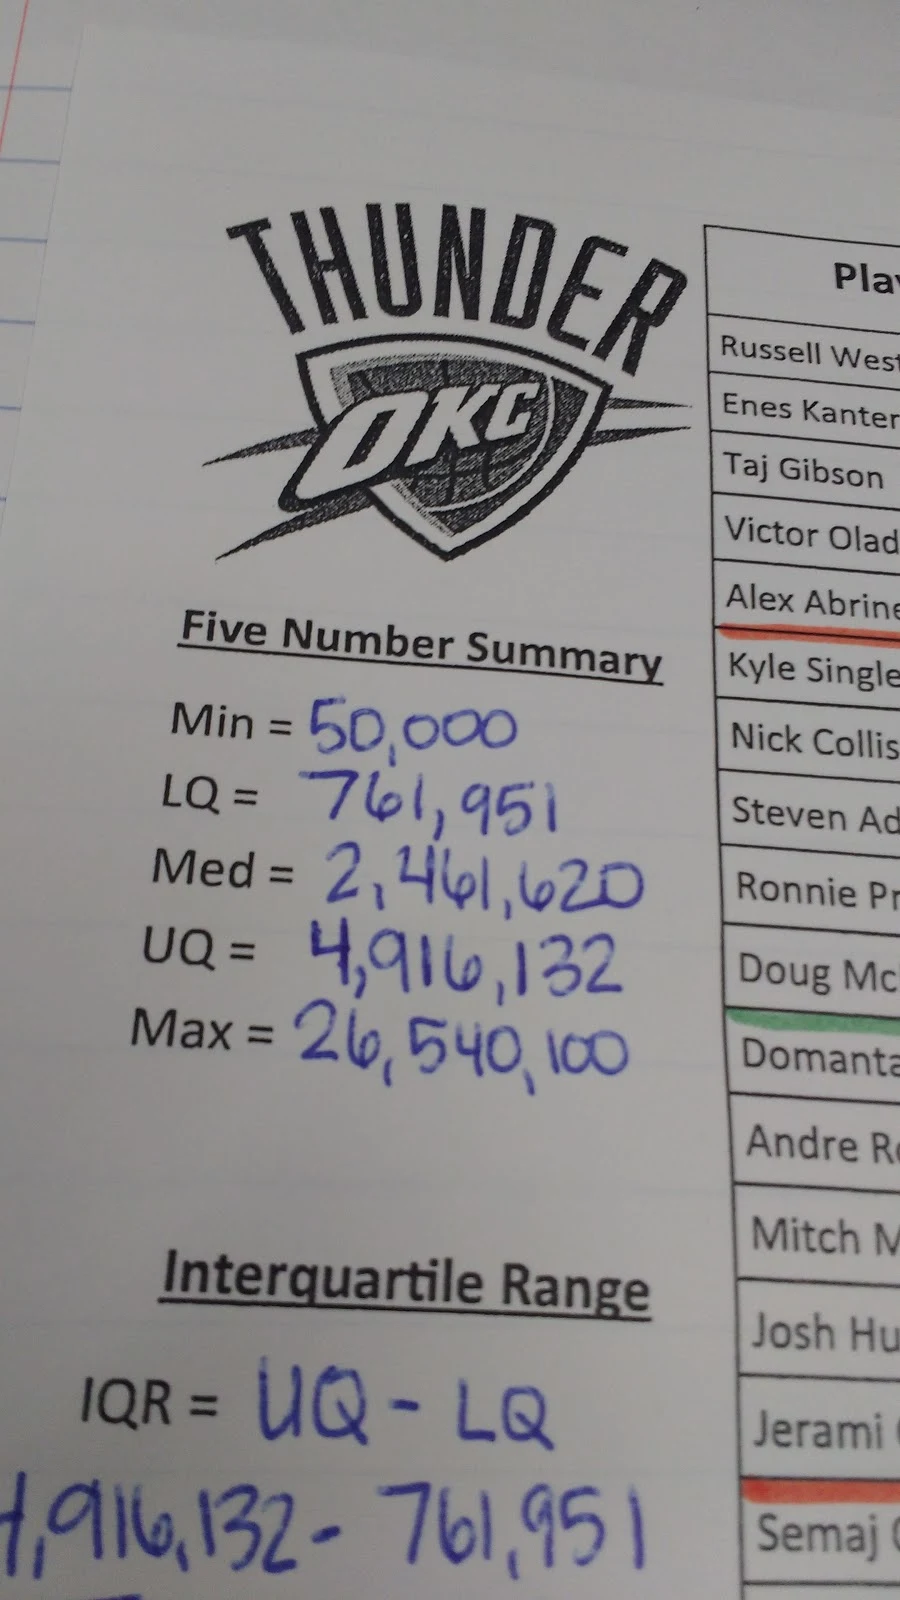 okc thunder outliers notes. 